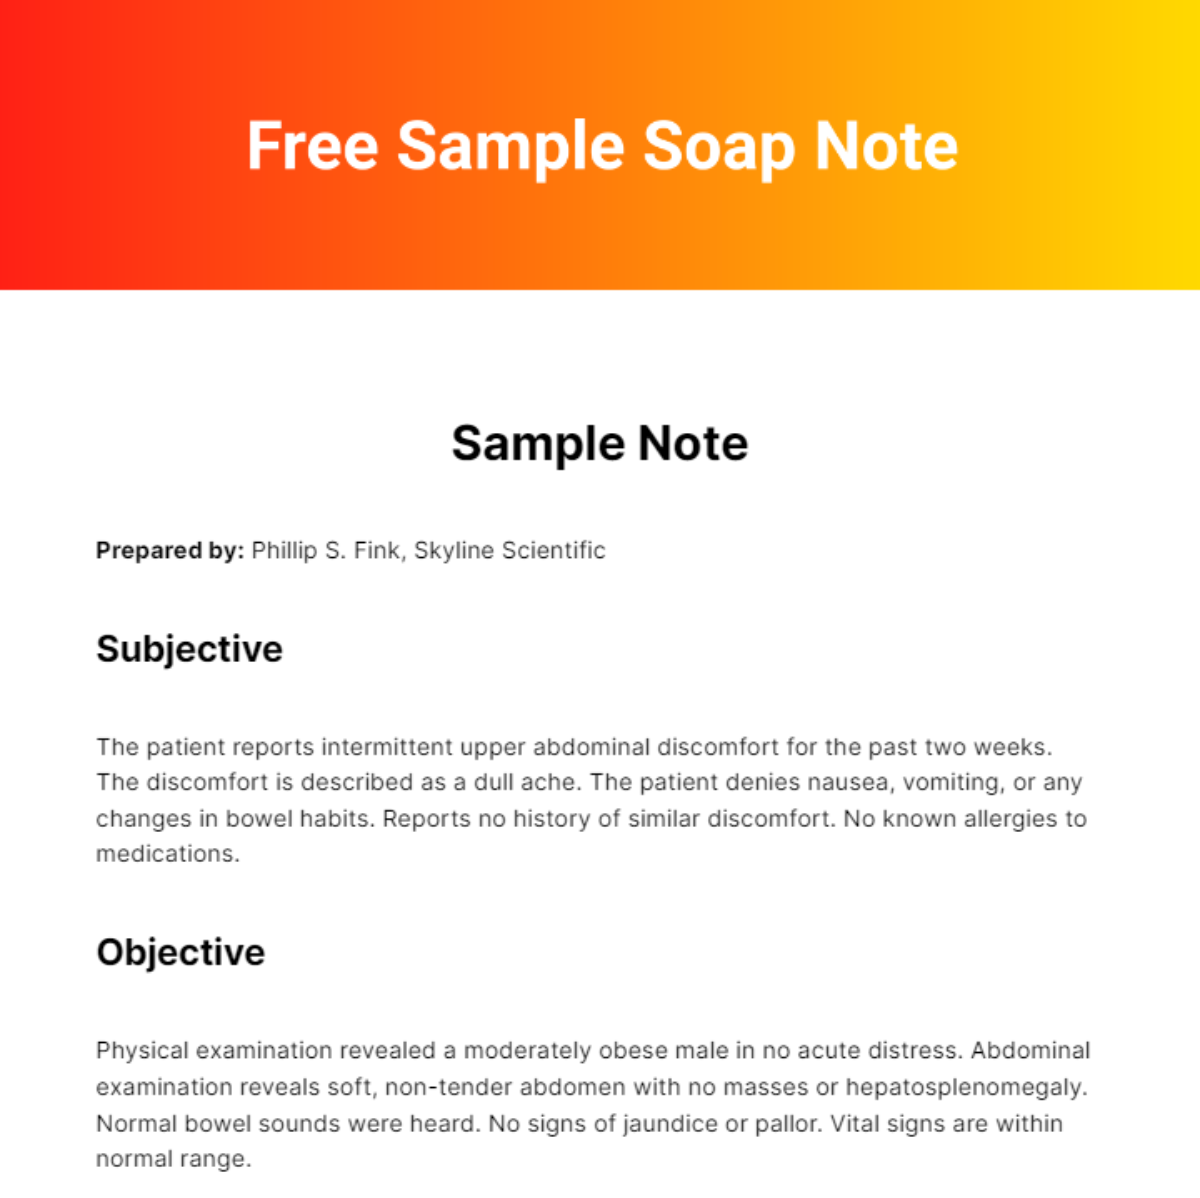 Free Sample Soap Note Template